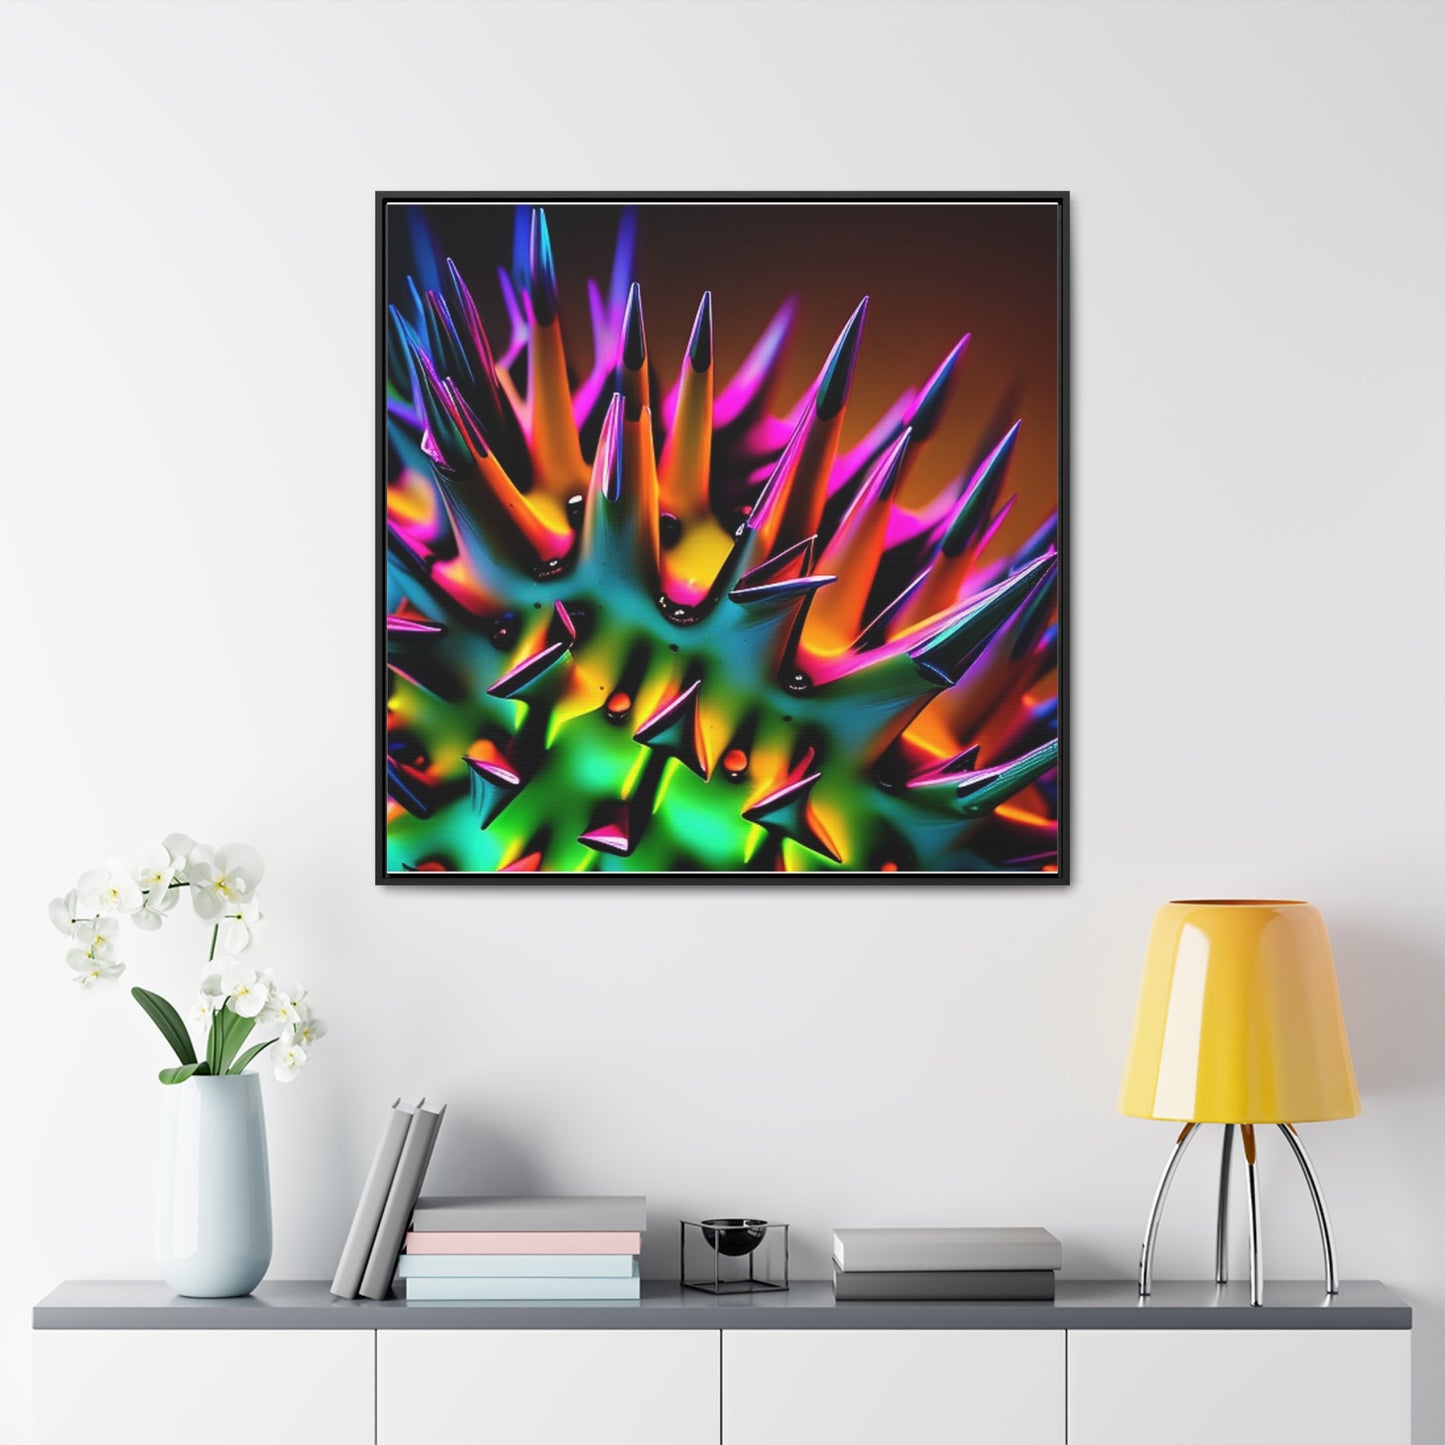 Gallery Canvas Wraps, Square Frame Macro Neon Spike 3